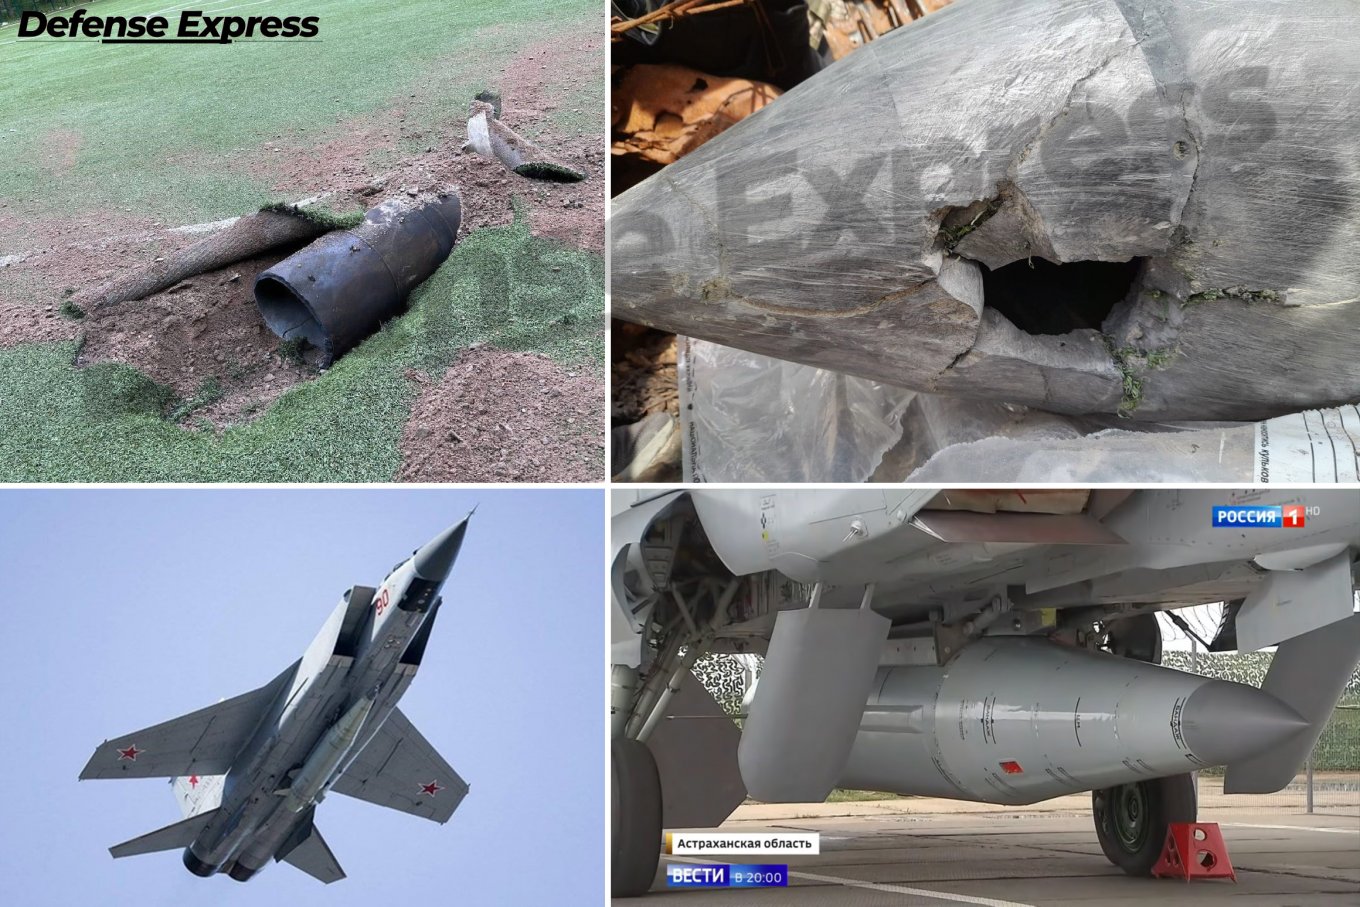 The Kh-47 missile, May 4, 2023 Defense Express Ukrainian Air Defense Forces Repel a Multidirectional Missile Attack: 6 Kinjal, 9 Kalibr, 3 S-400 and Iskander-M Missiles, 6 Strike and 3 Reconnaissance Drones